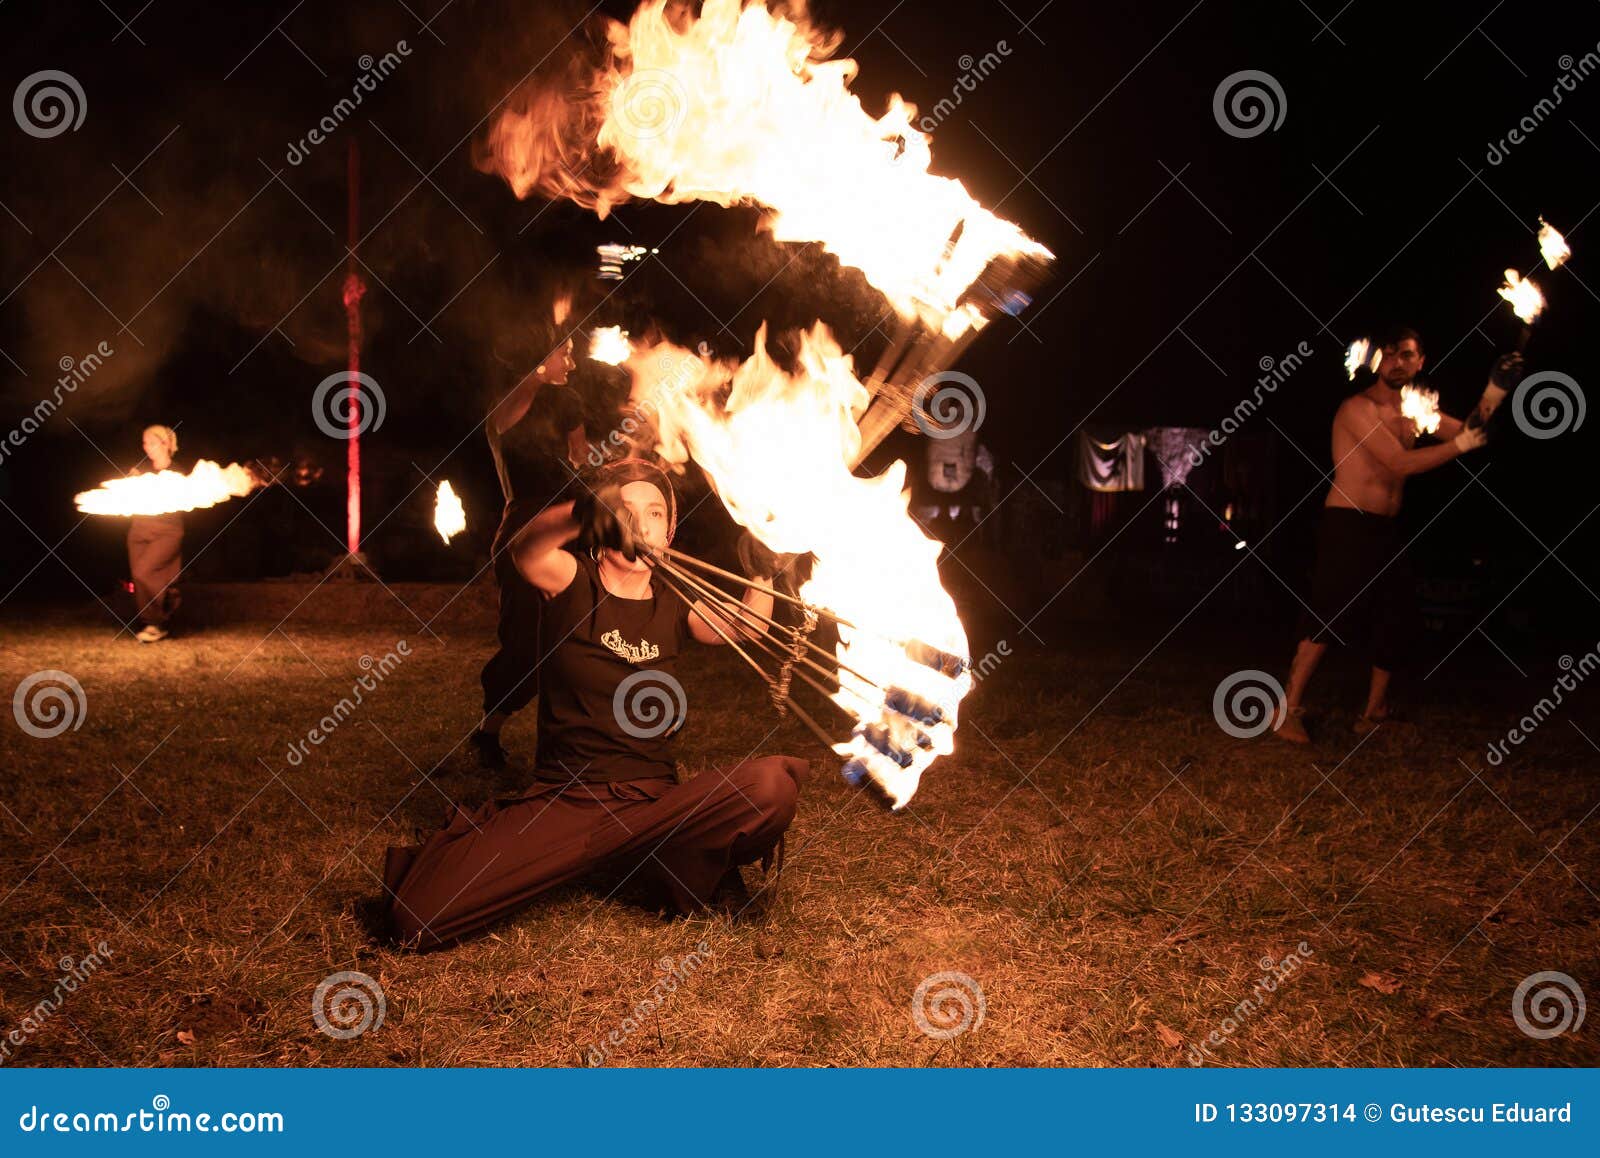 Transylvania Medieval Festival In Romania, Fire-spitting ,flame Thrower ...